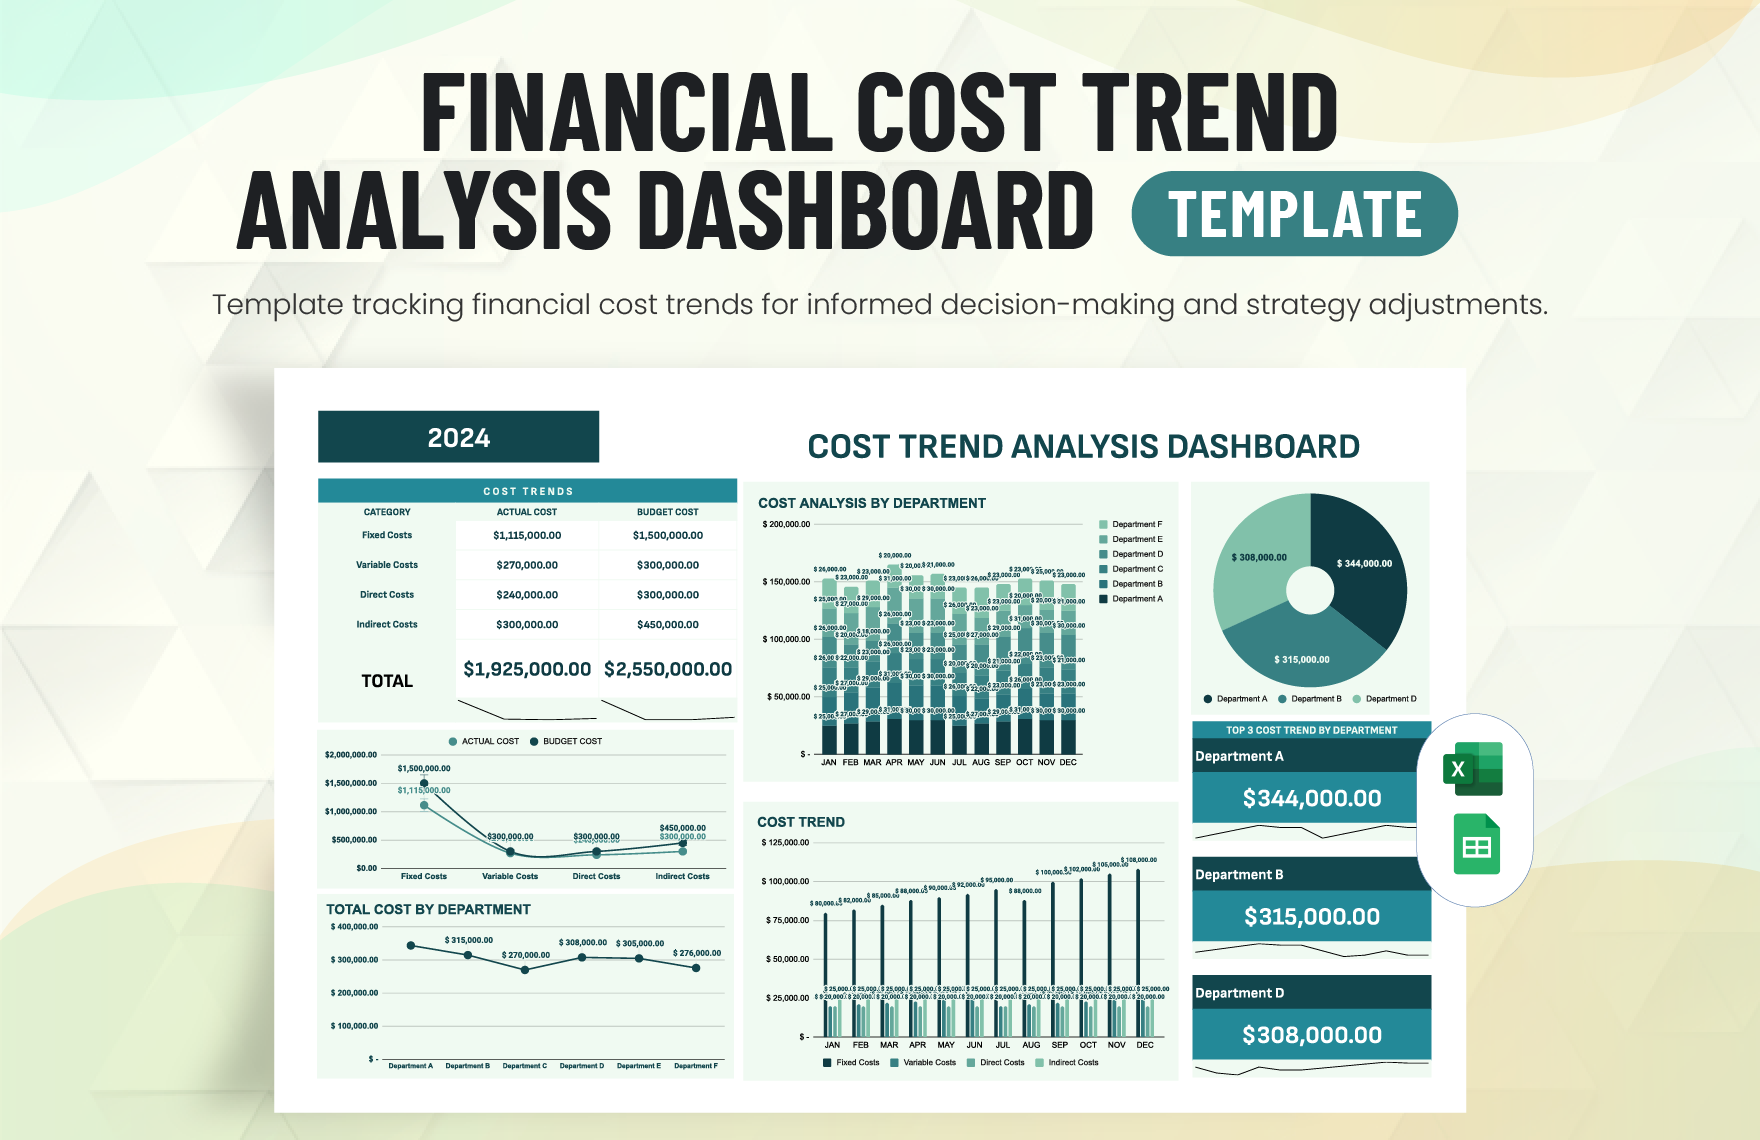 Financial Cost Trend Analysis Dashboard Template in Excel, Google Sheets